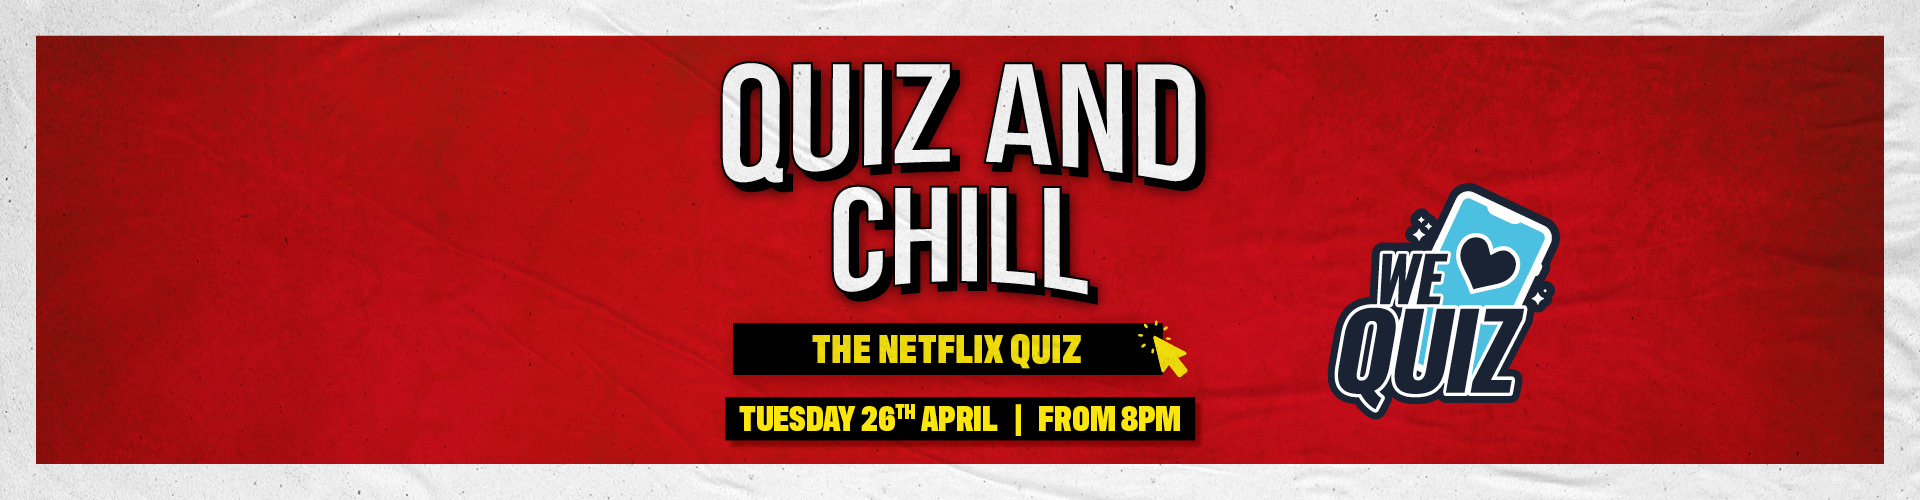 The Netflix Quiz - Tuesday 26th April from 8pm